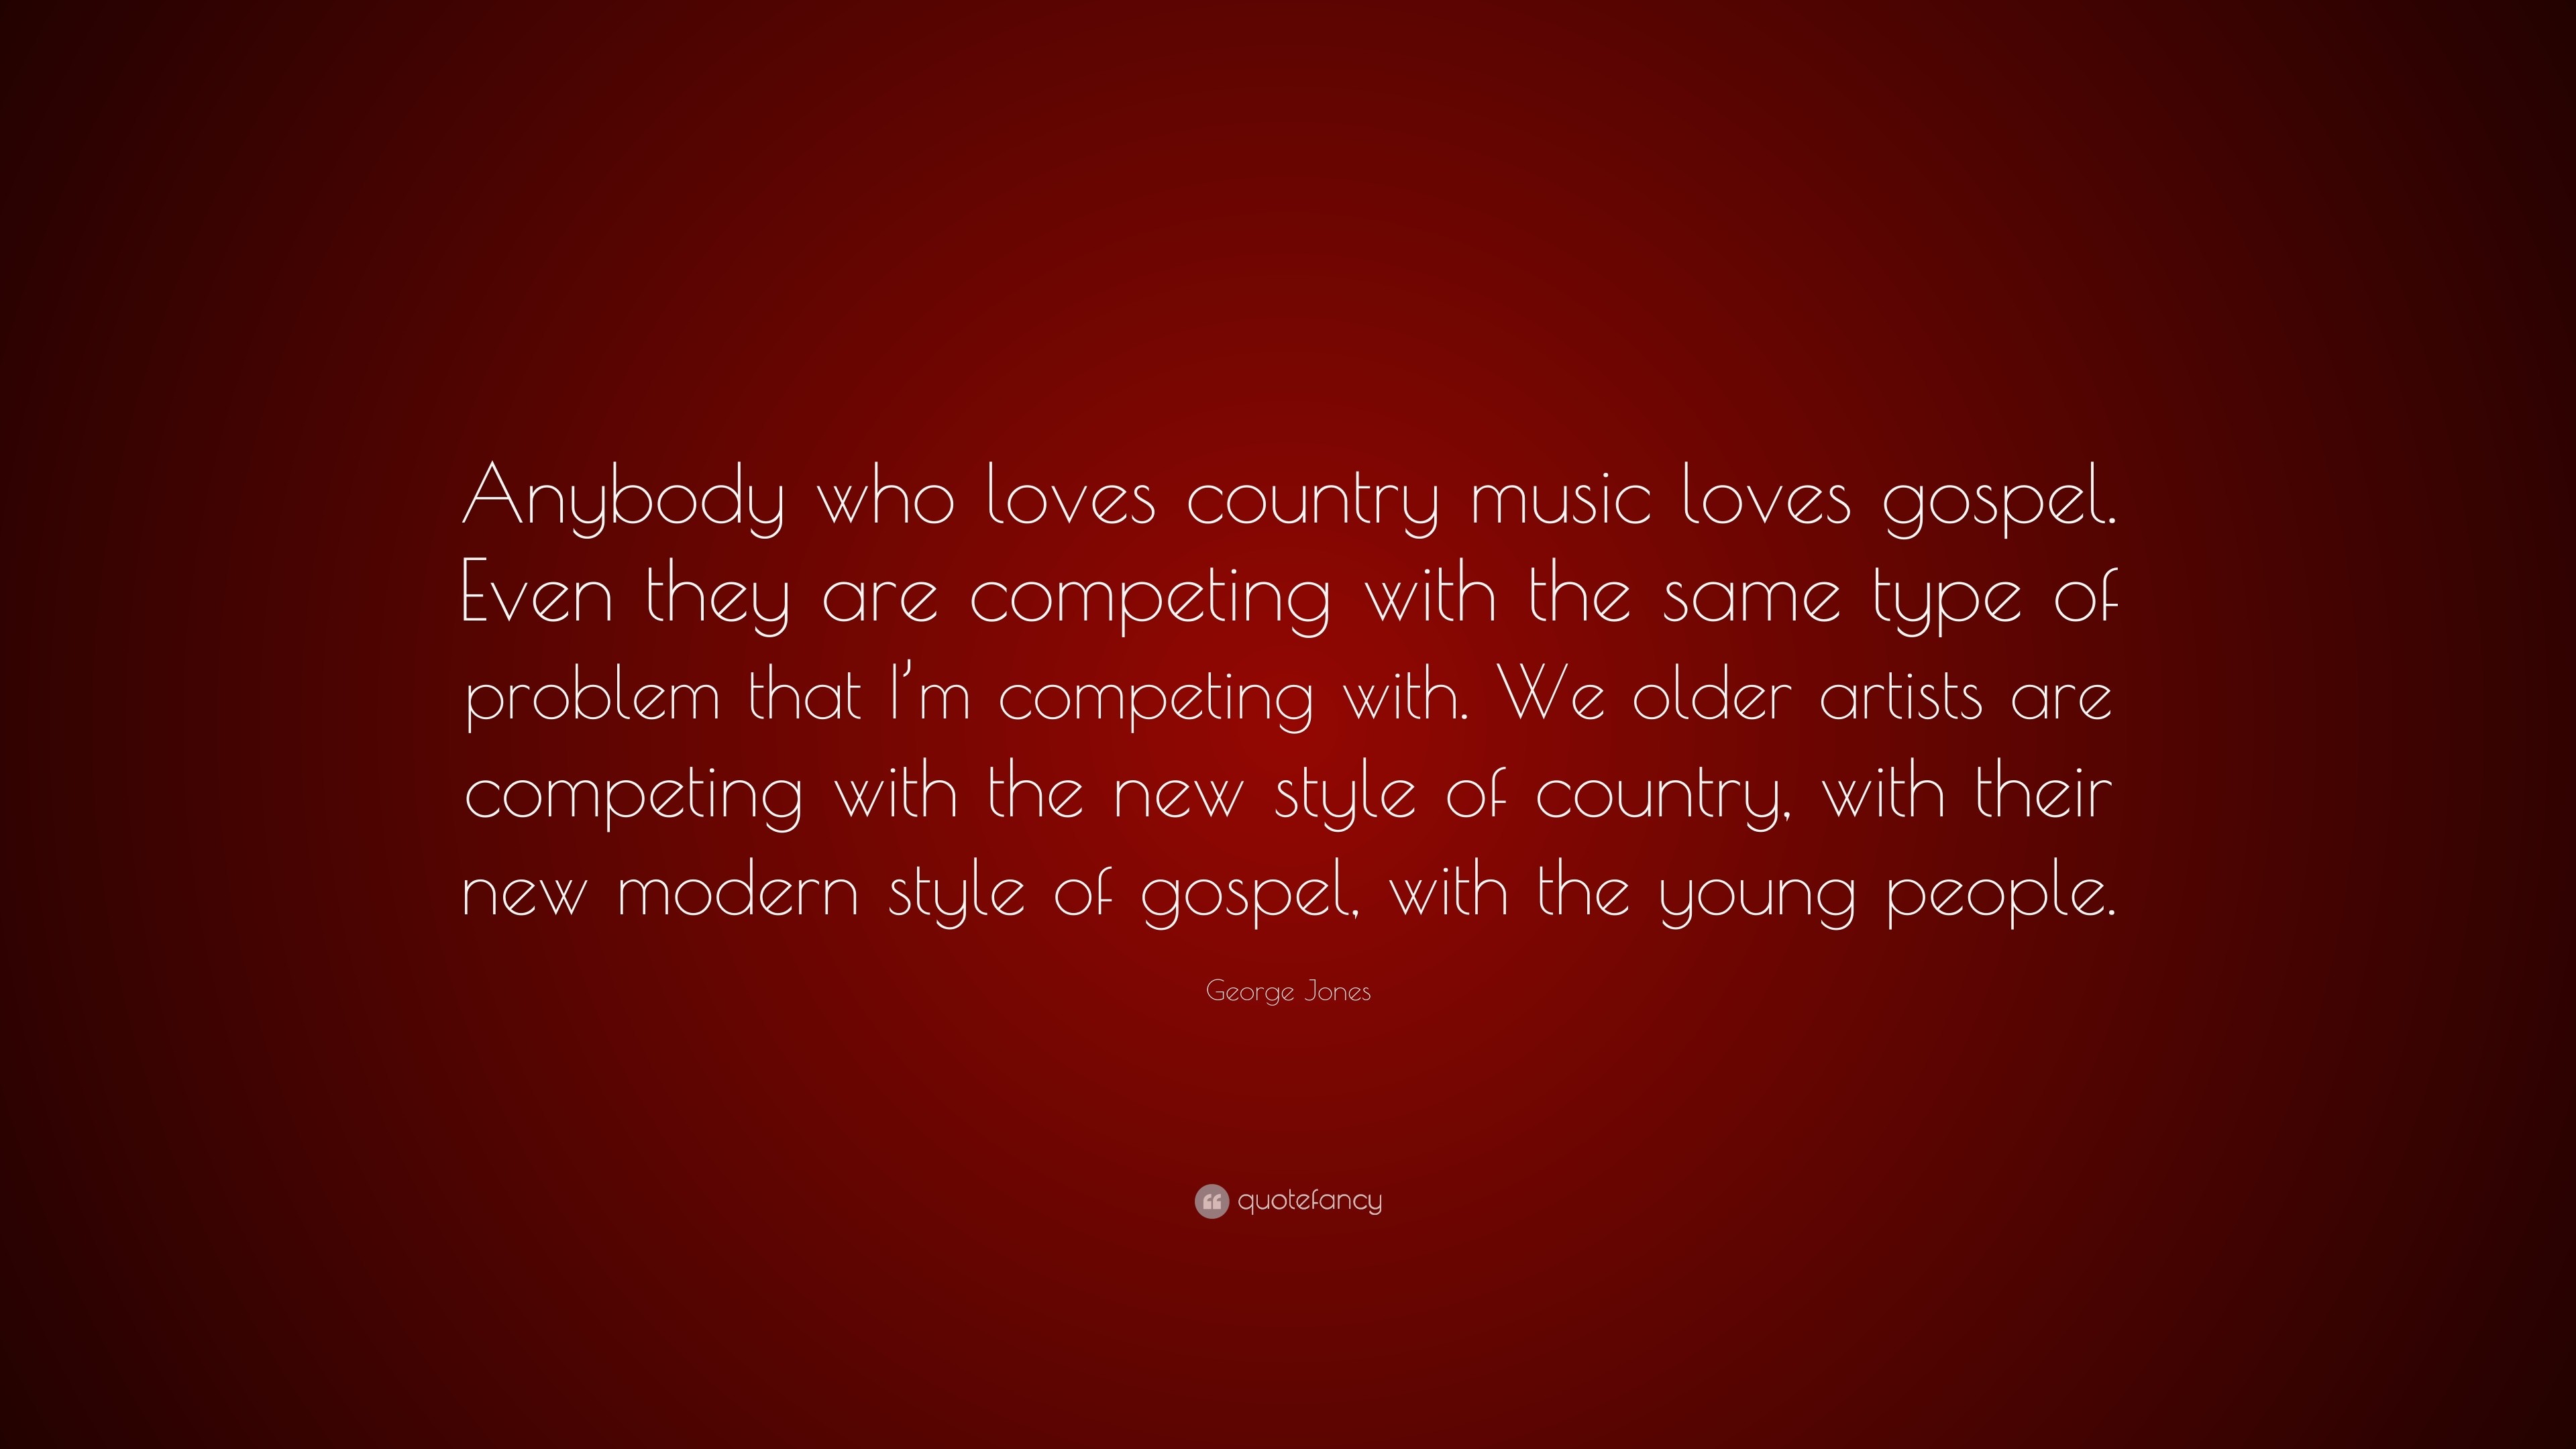 3840x2160 George Jones Quote: “Anybody who loves country music loves gospel. Even  they are